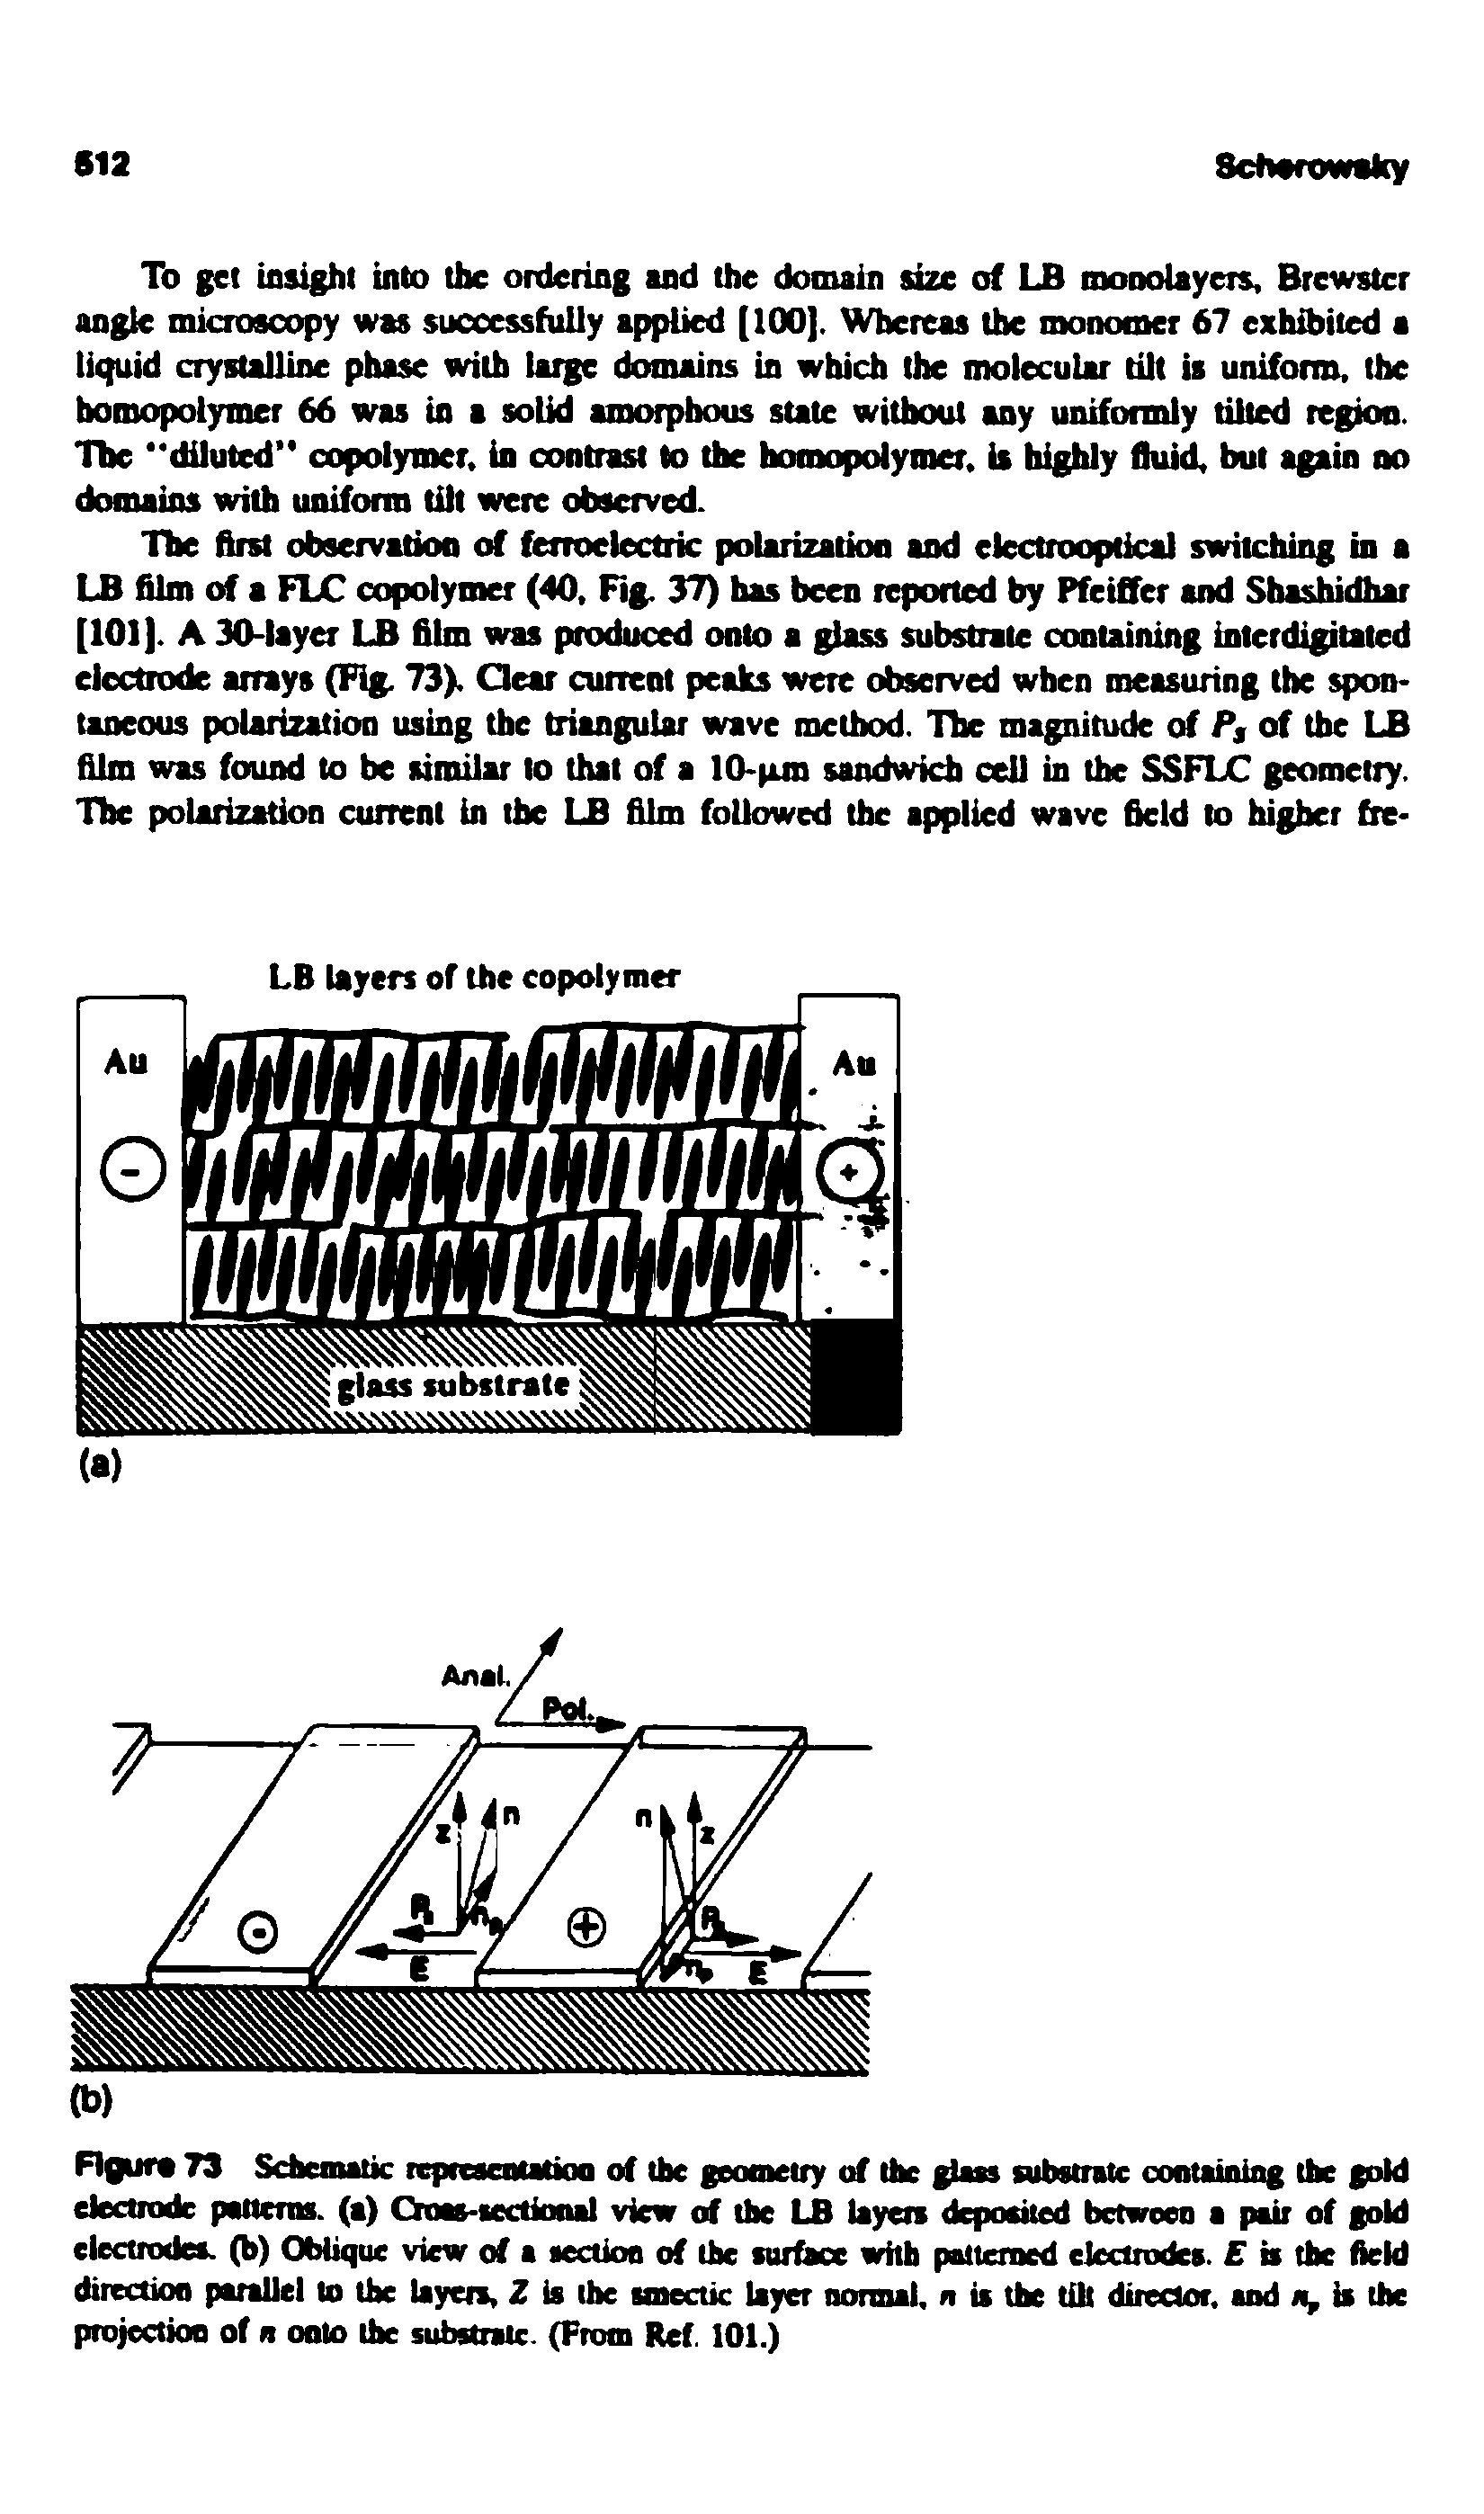 Figure 73 Schematic reperaentatioo of the geometry of the glass substrate containing the gold electrode patterns, (a) Onas-sectioiiBl view of the LB layets deposited between a pair of gold electrodes, (b) Oblique view of a section of the surface i h paiteroed electrodes. is the field directioo parallel bs the layers, Z is the smectic layer normal, n is the tilt director, and is the projection of n onto the sufastralc. (From Ref. 101.)...